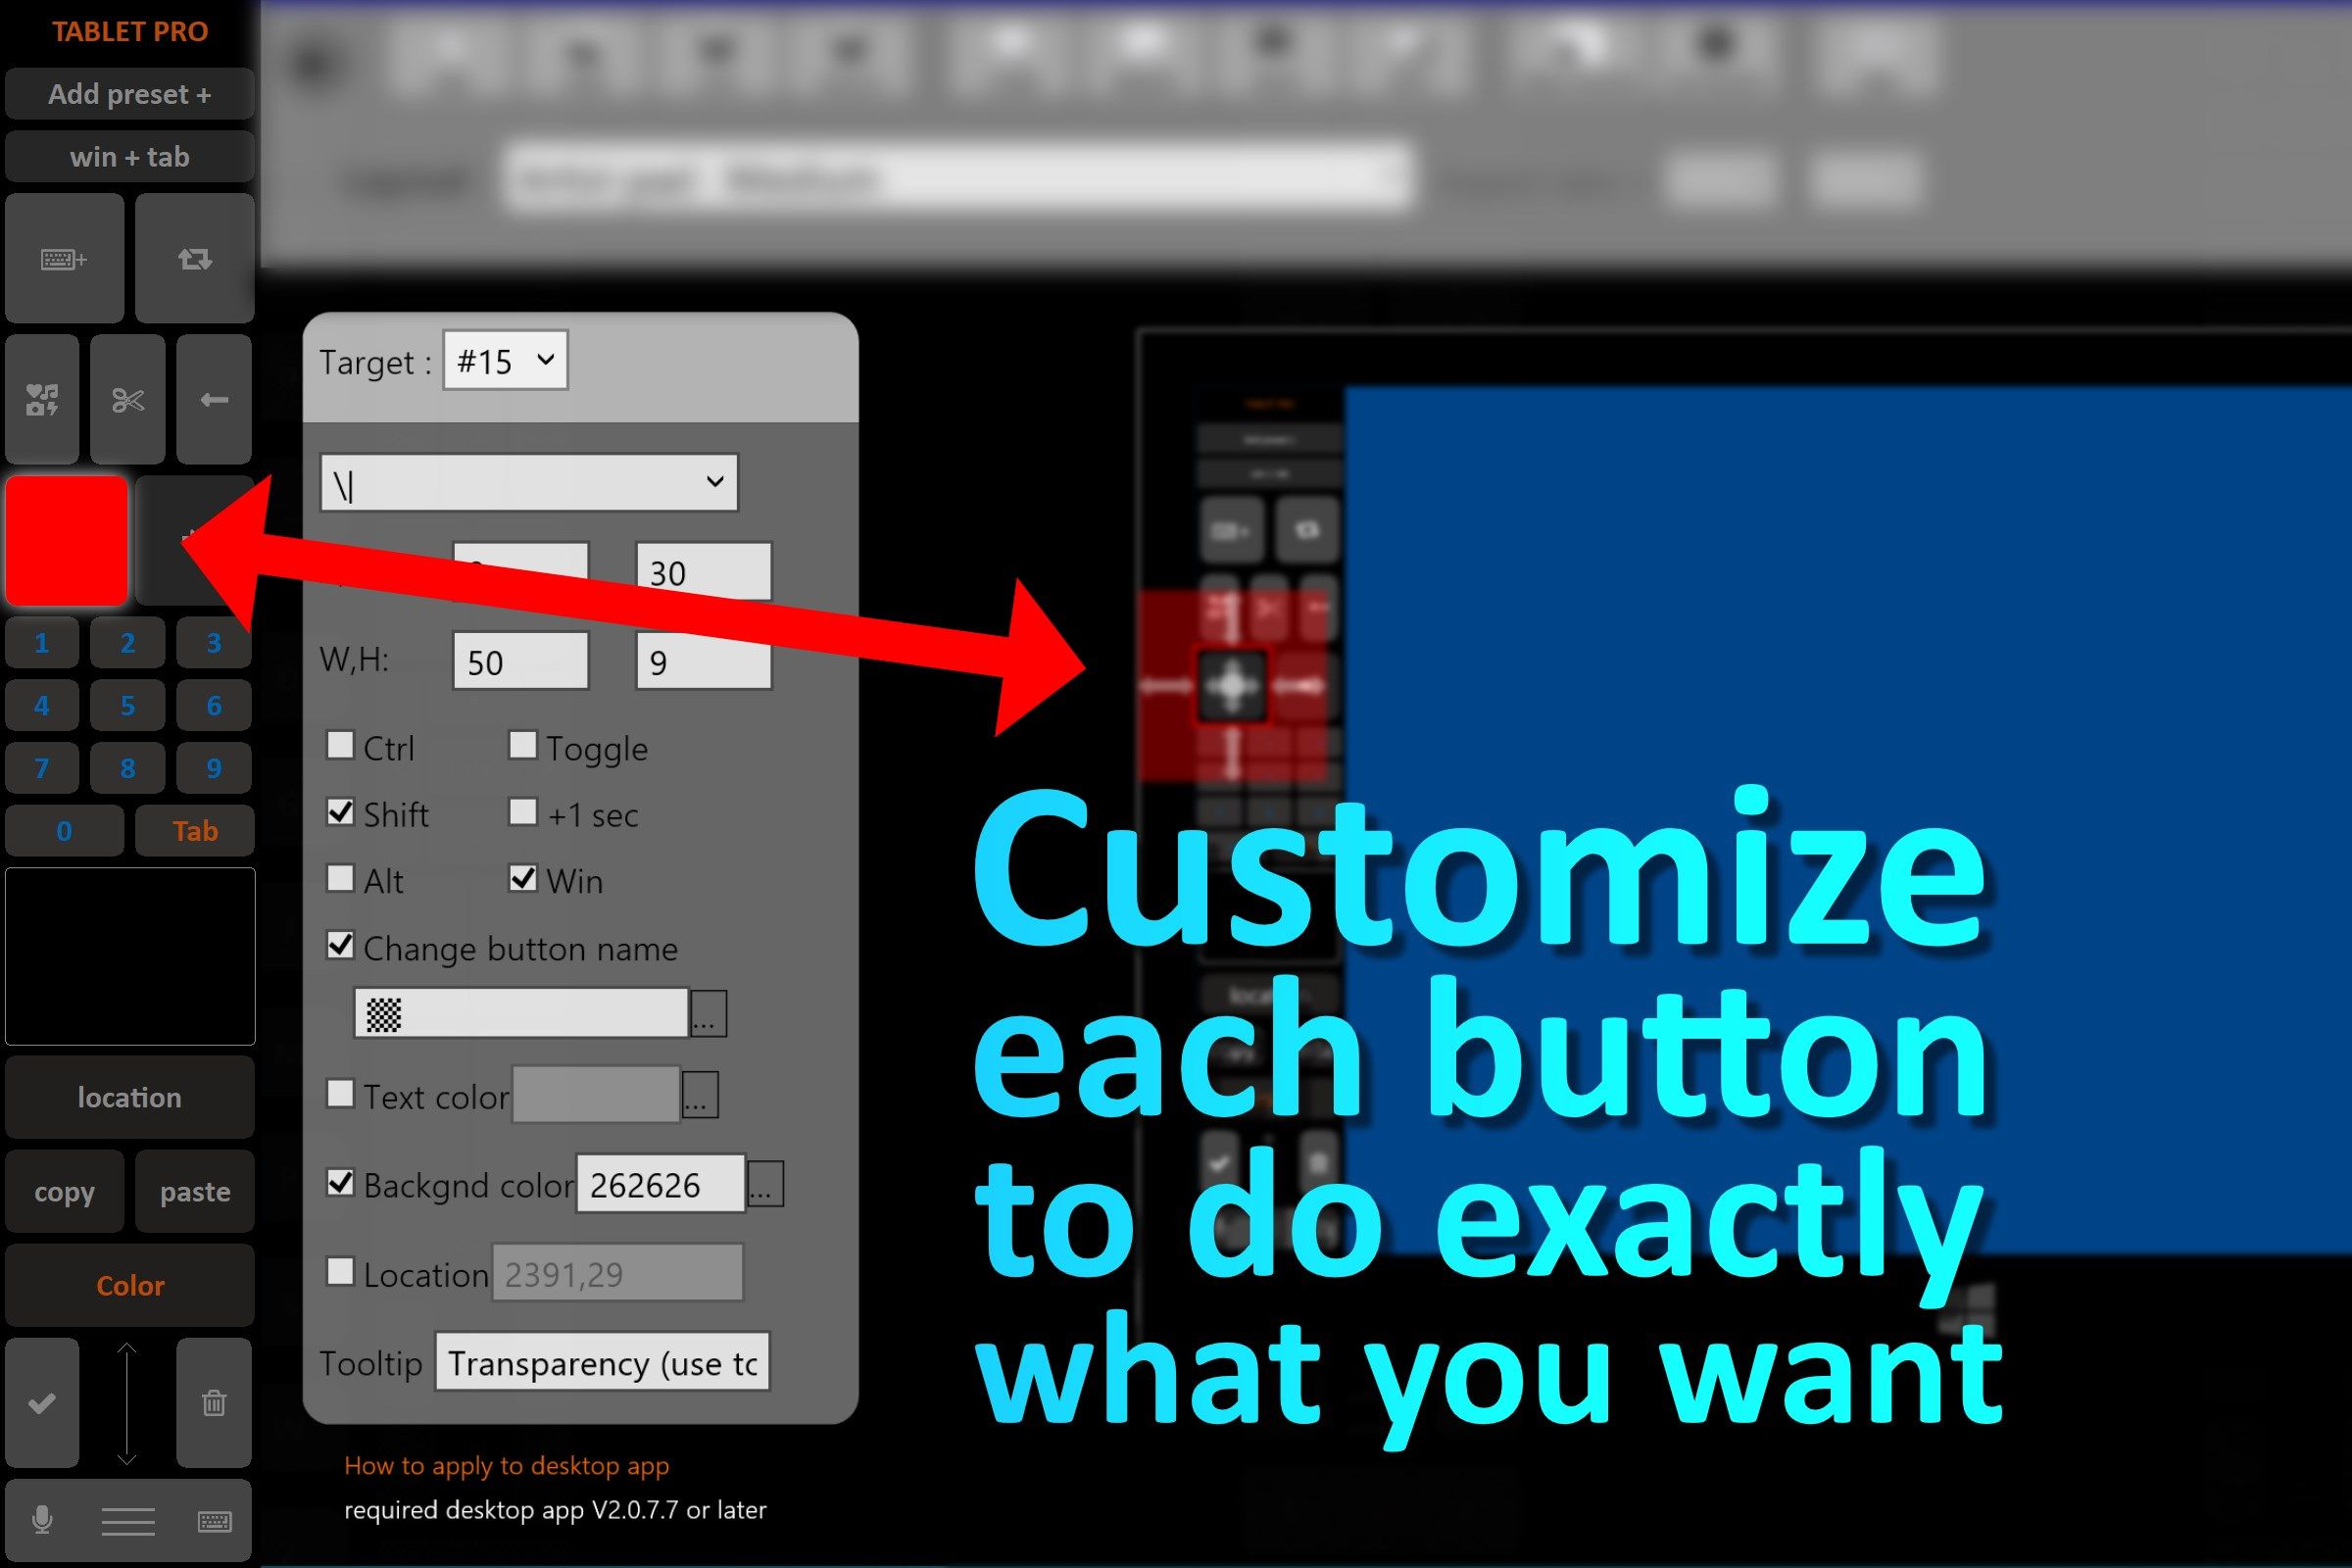 Customize each button to do whatever you want. This is an EXTREMELY powerful program. Buttons can be set to do complicated keyboard and mouse combinations like Alt + Shift + Middle mouse drag and specify a starting location on the screen. Or just make an "undo" button with Ctrl + Z. Almost any hotkey combination.